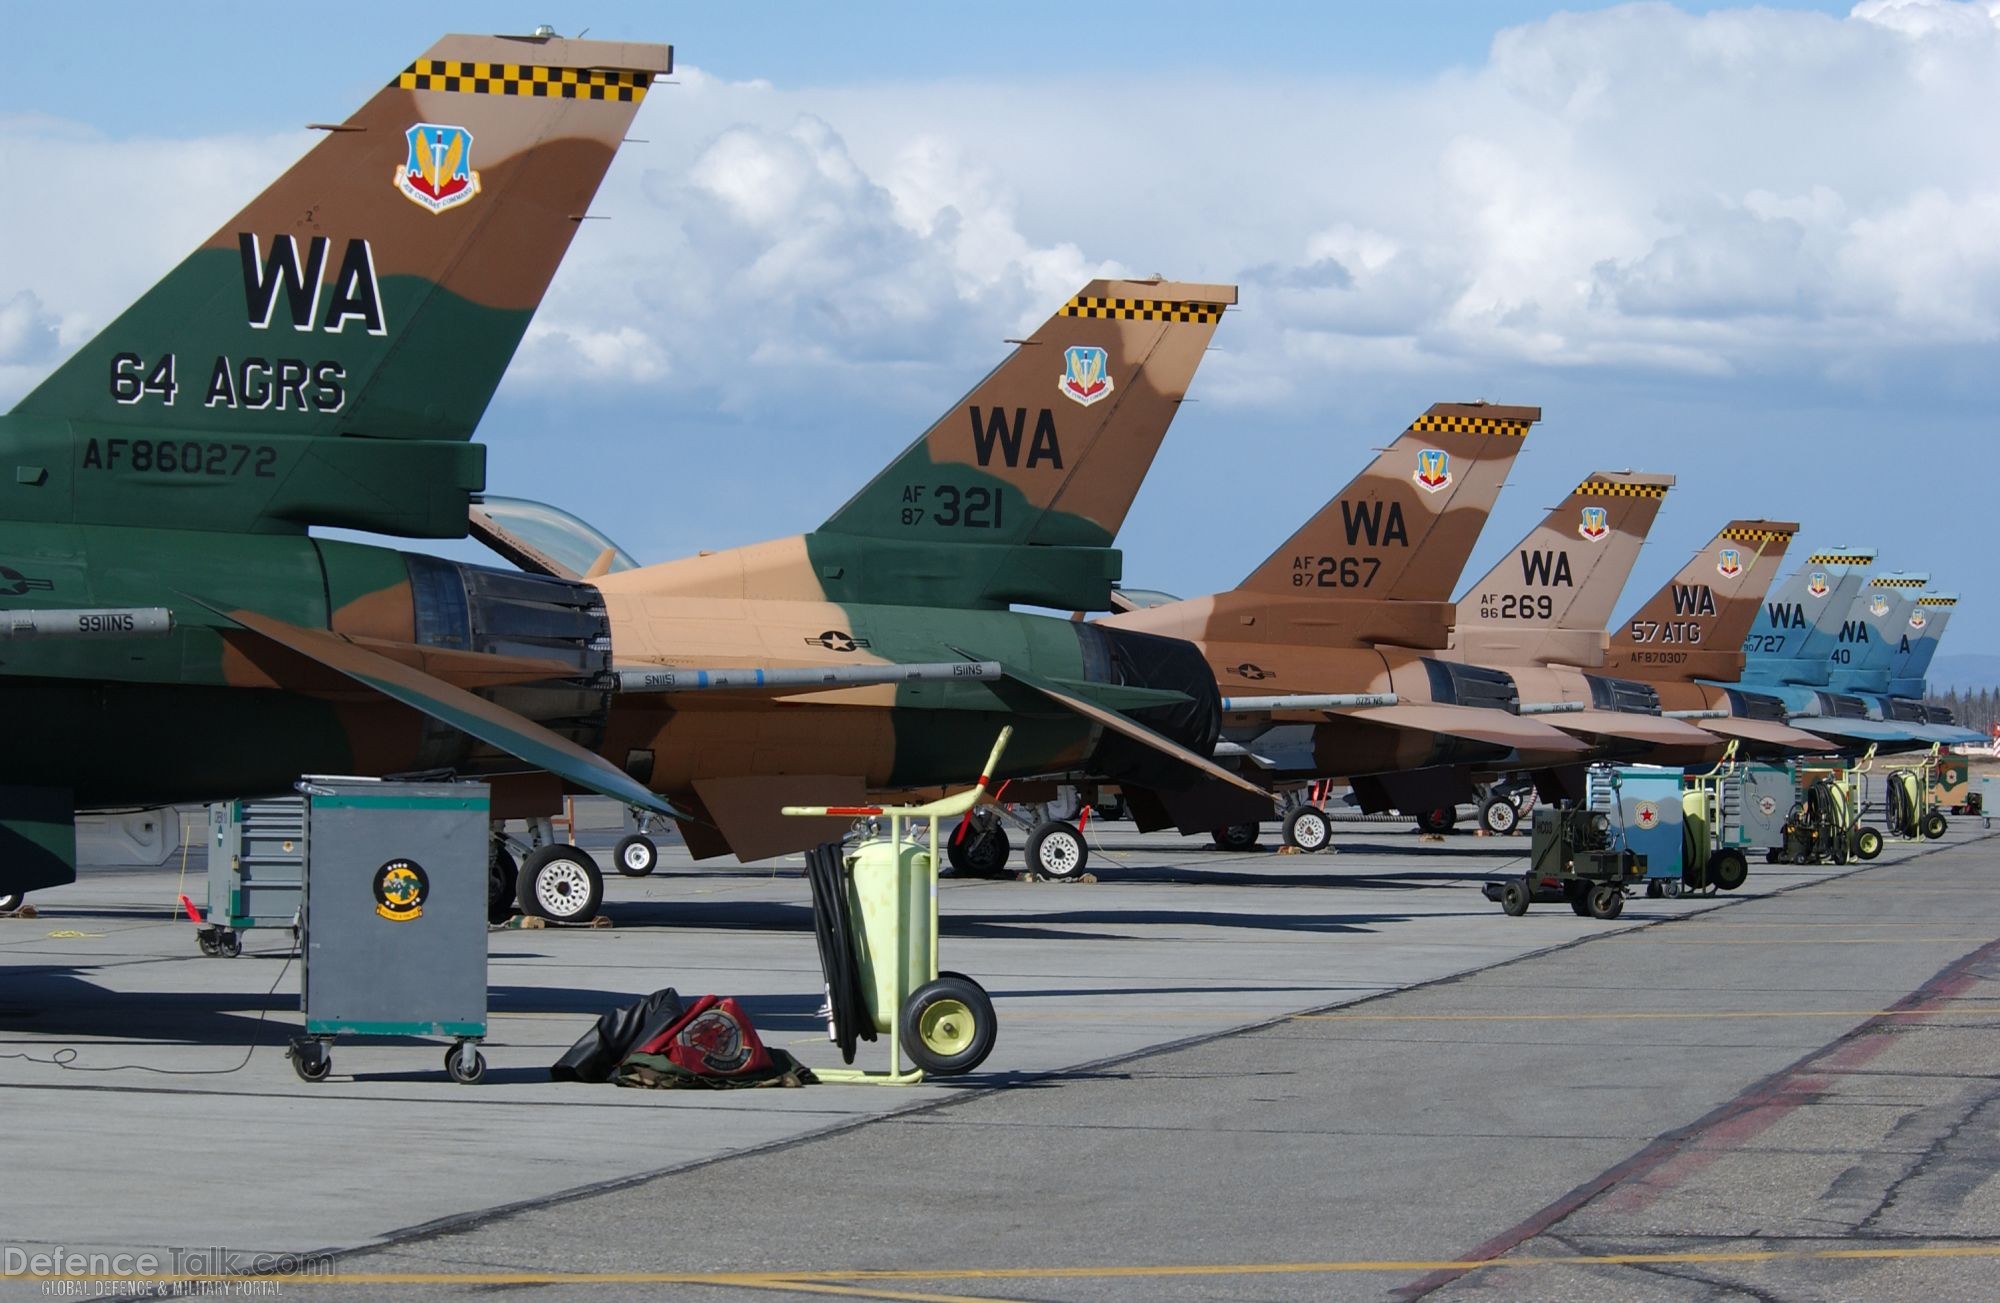 Eight F-16 Fighting Falcons - US Air Force Exercise